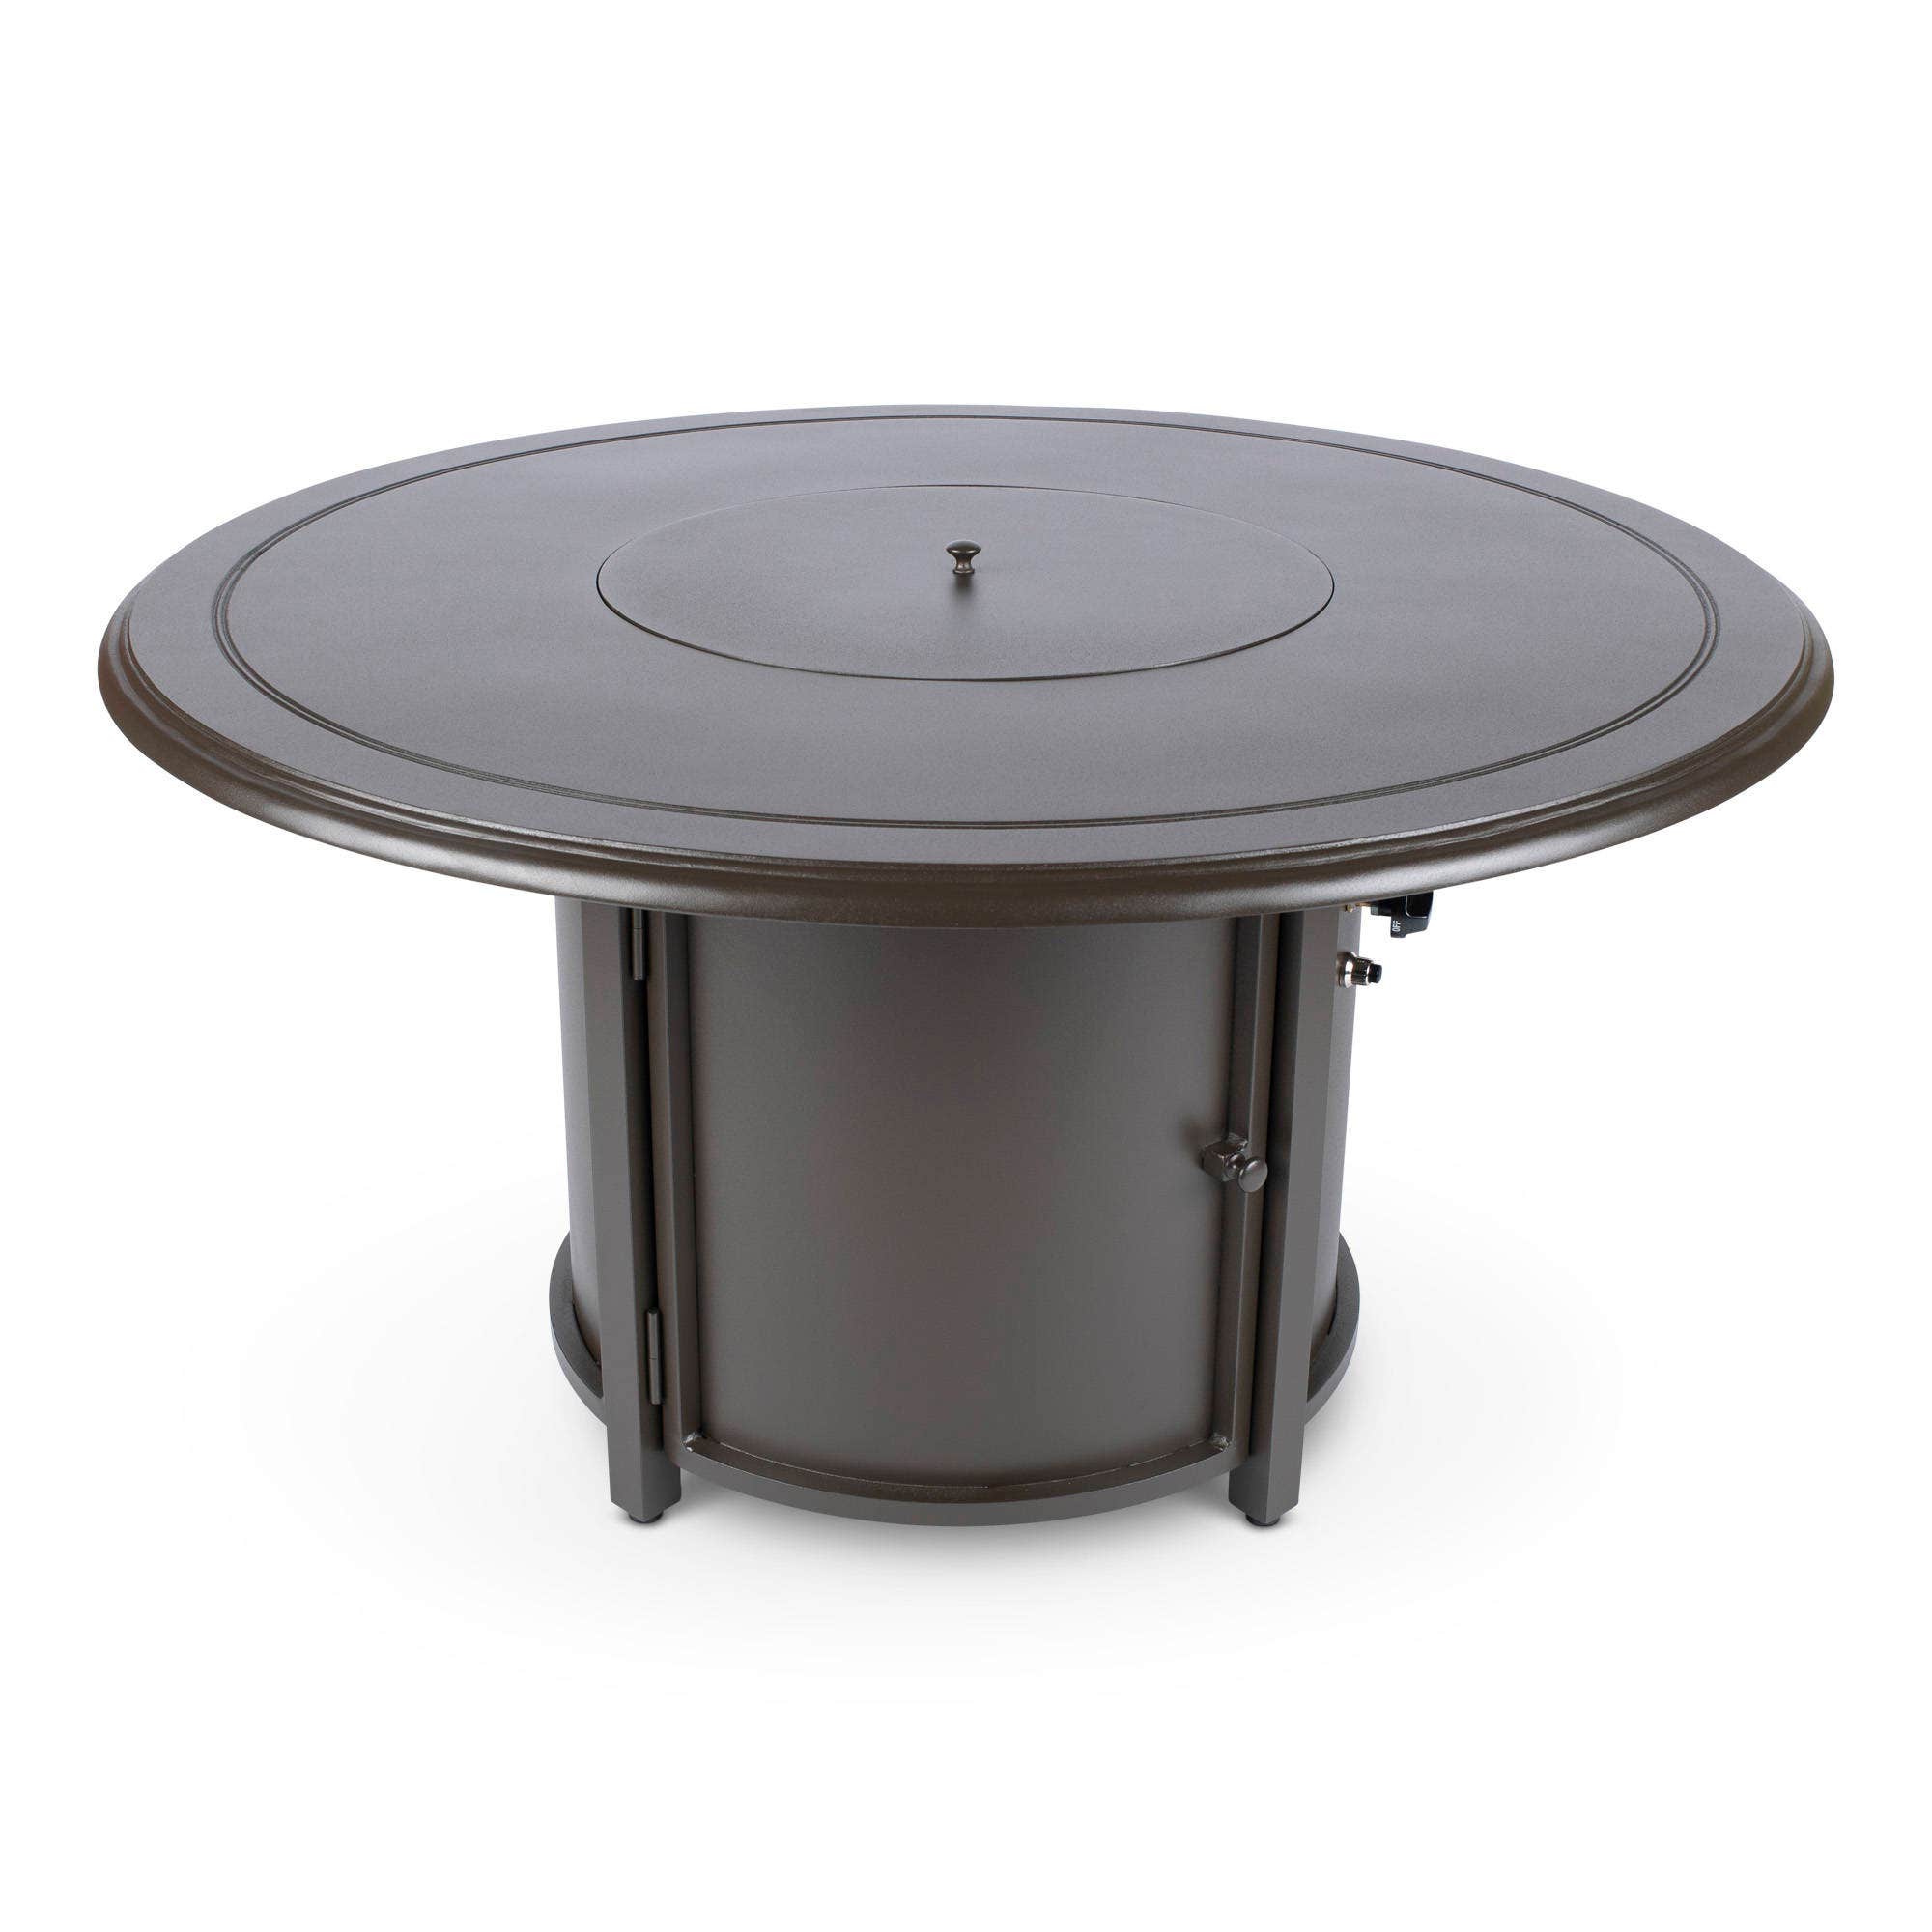 Woodard 48 inch Round Solid Cast with Beaded Edge Chat Fire Table in Aztec Bronze 12037546